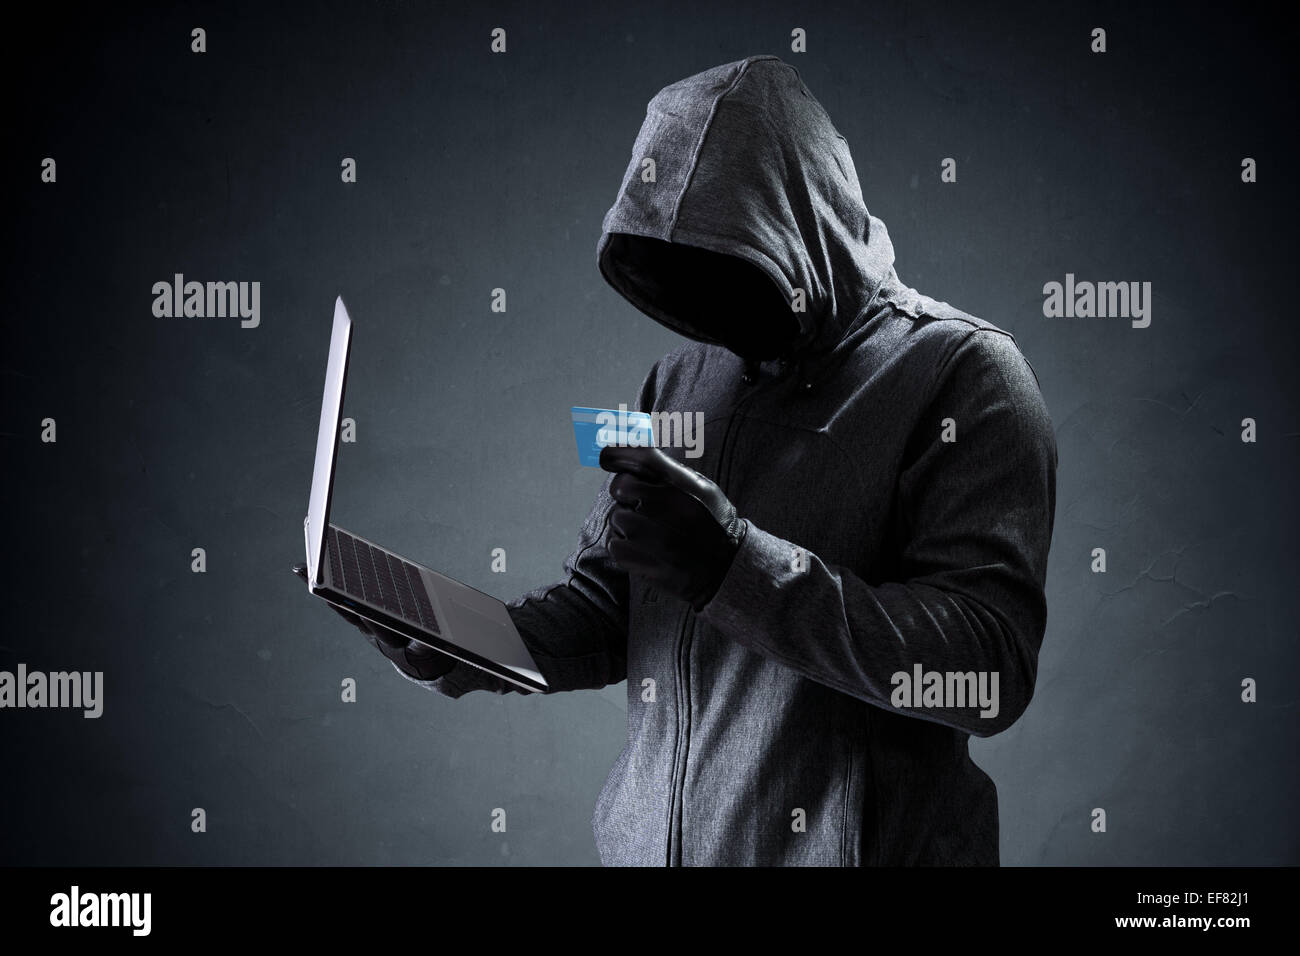 Computer hacker with credit card stealing data from a laptop concept for network security, identity theft and computer crime Stock Photo